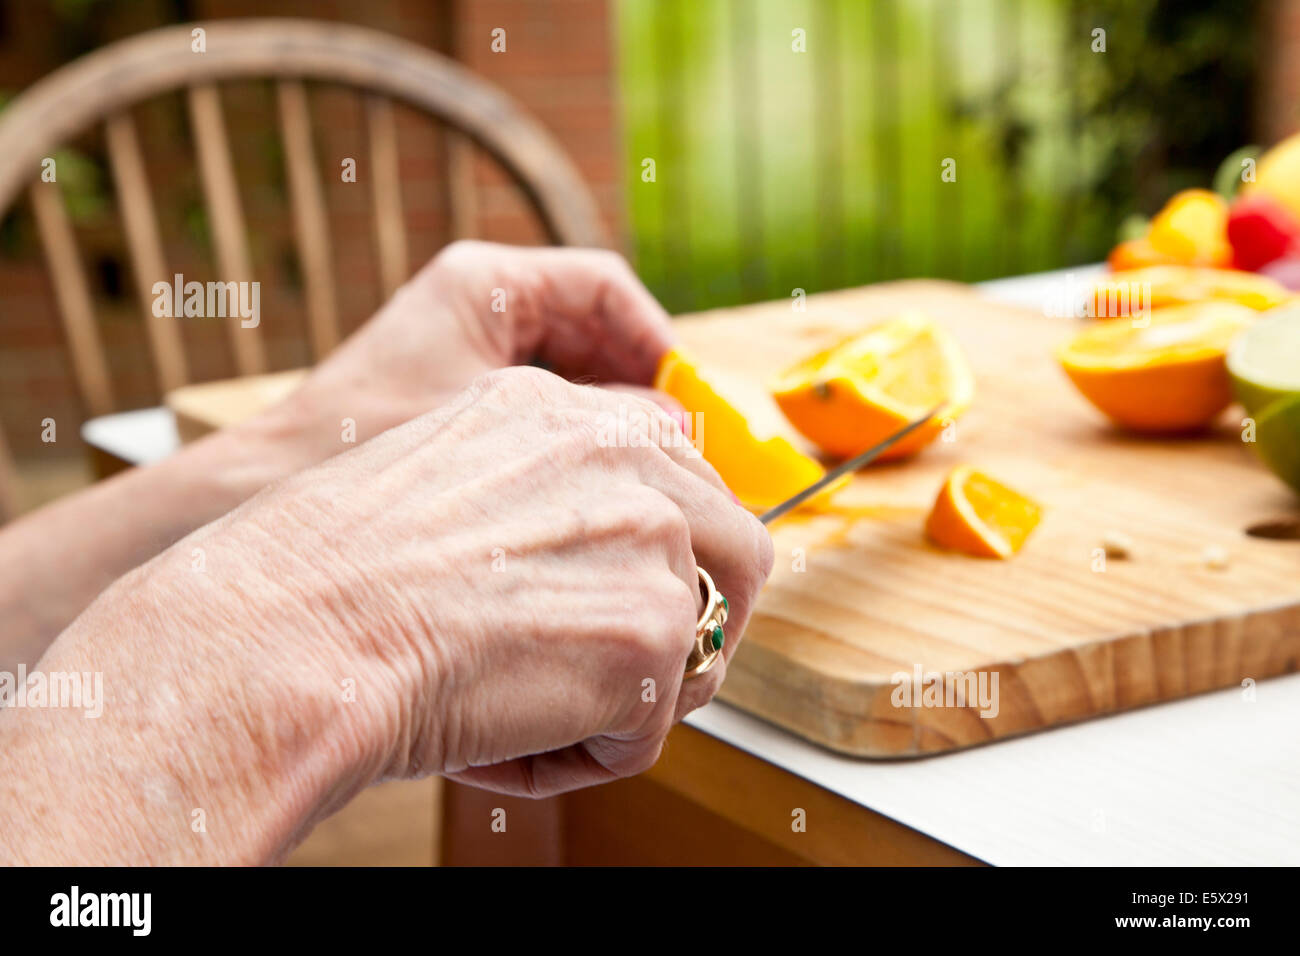 Hands of senior woman slicing oranges at garden table Stock Photo